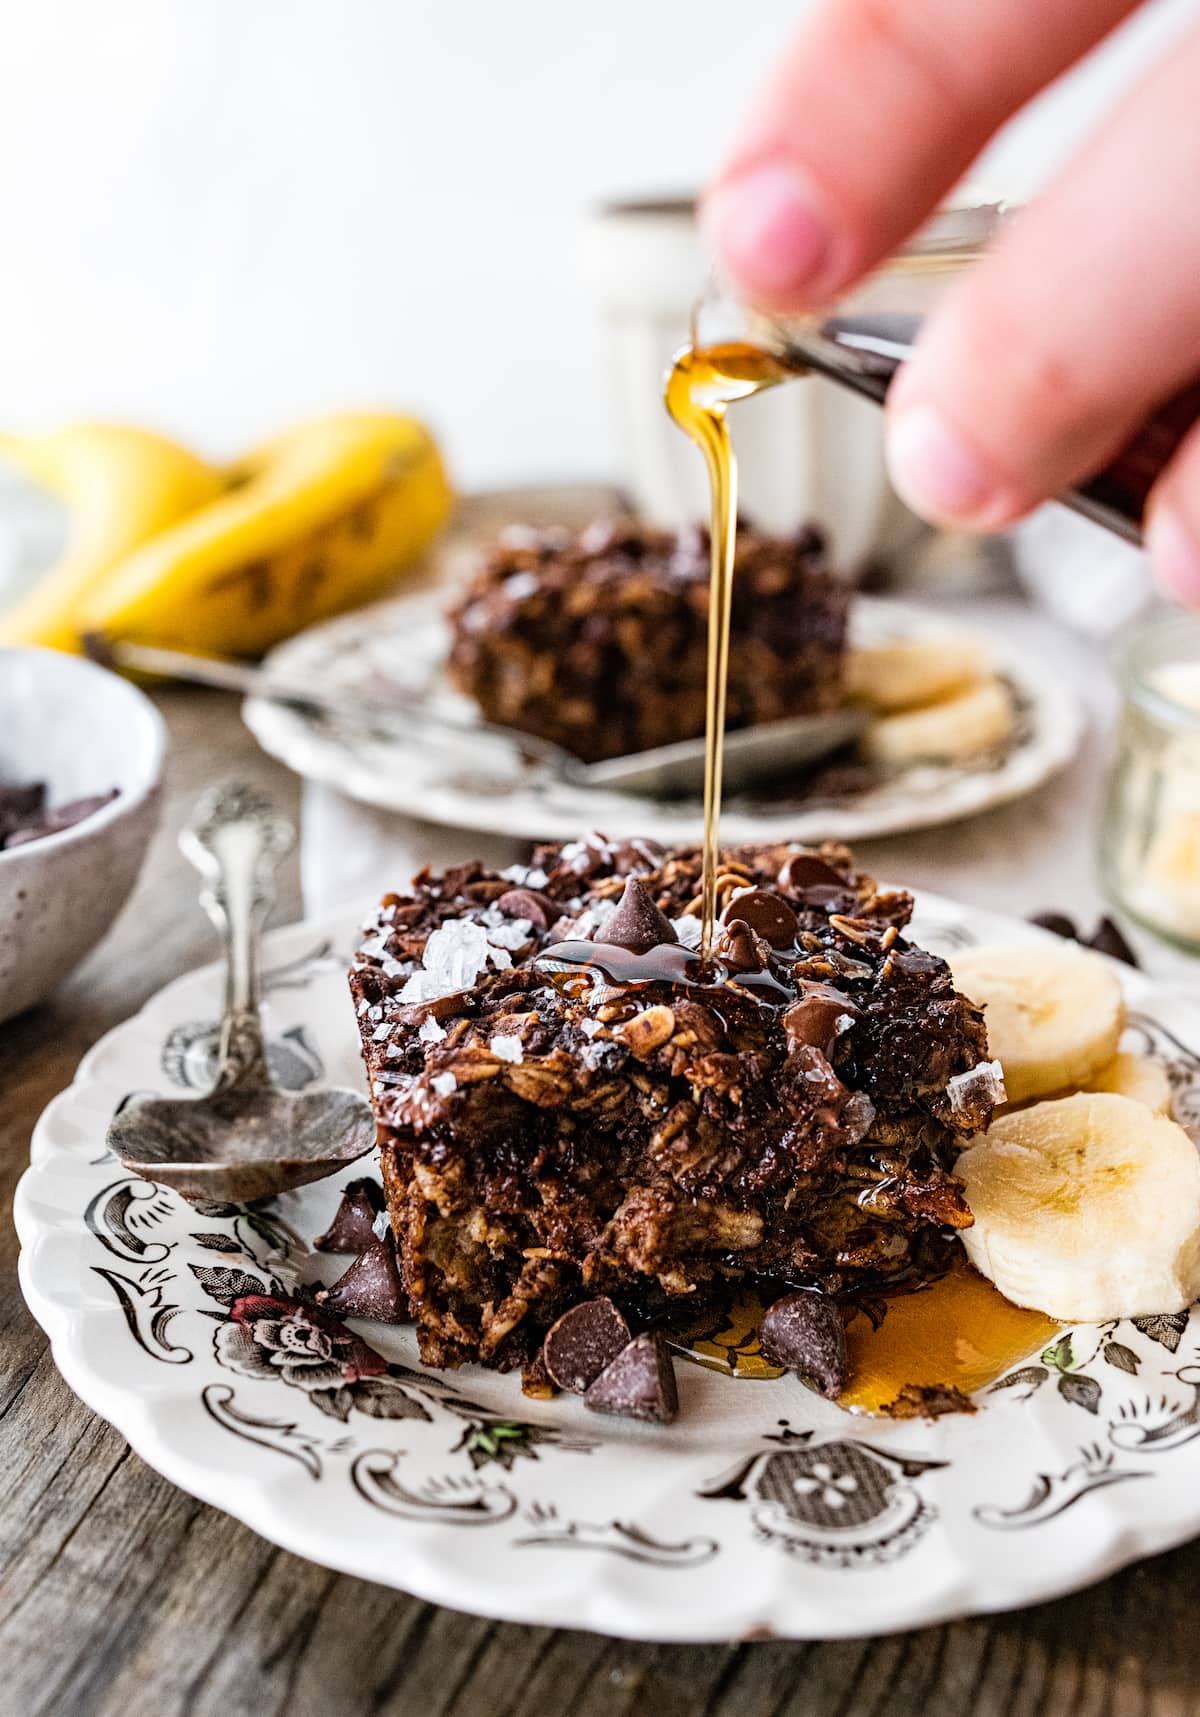 chocolate banana baked oatmeal square on plate with spoon, chocolate chips, banana slices, and maple syrup poured on top.